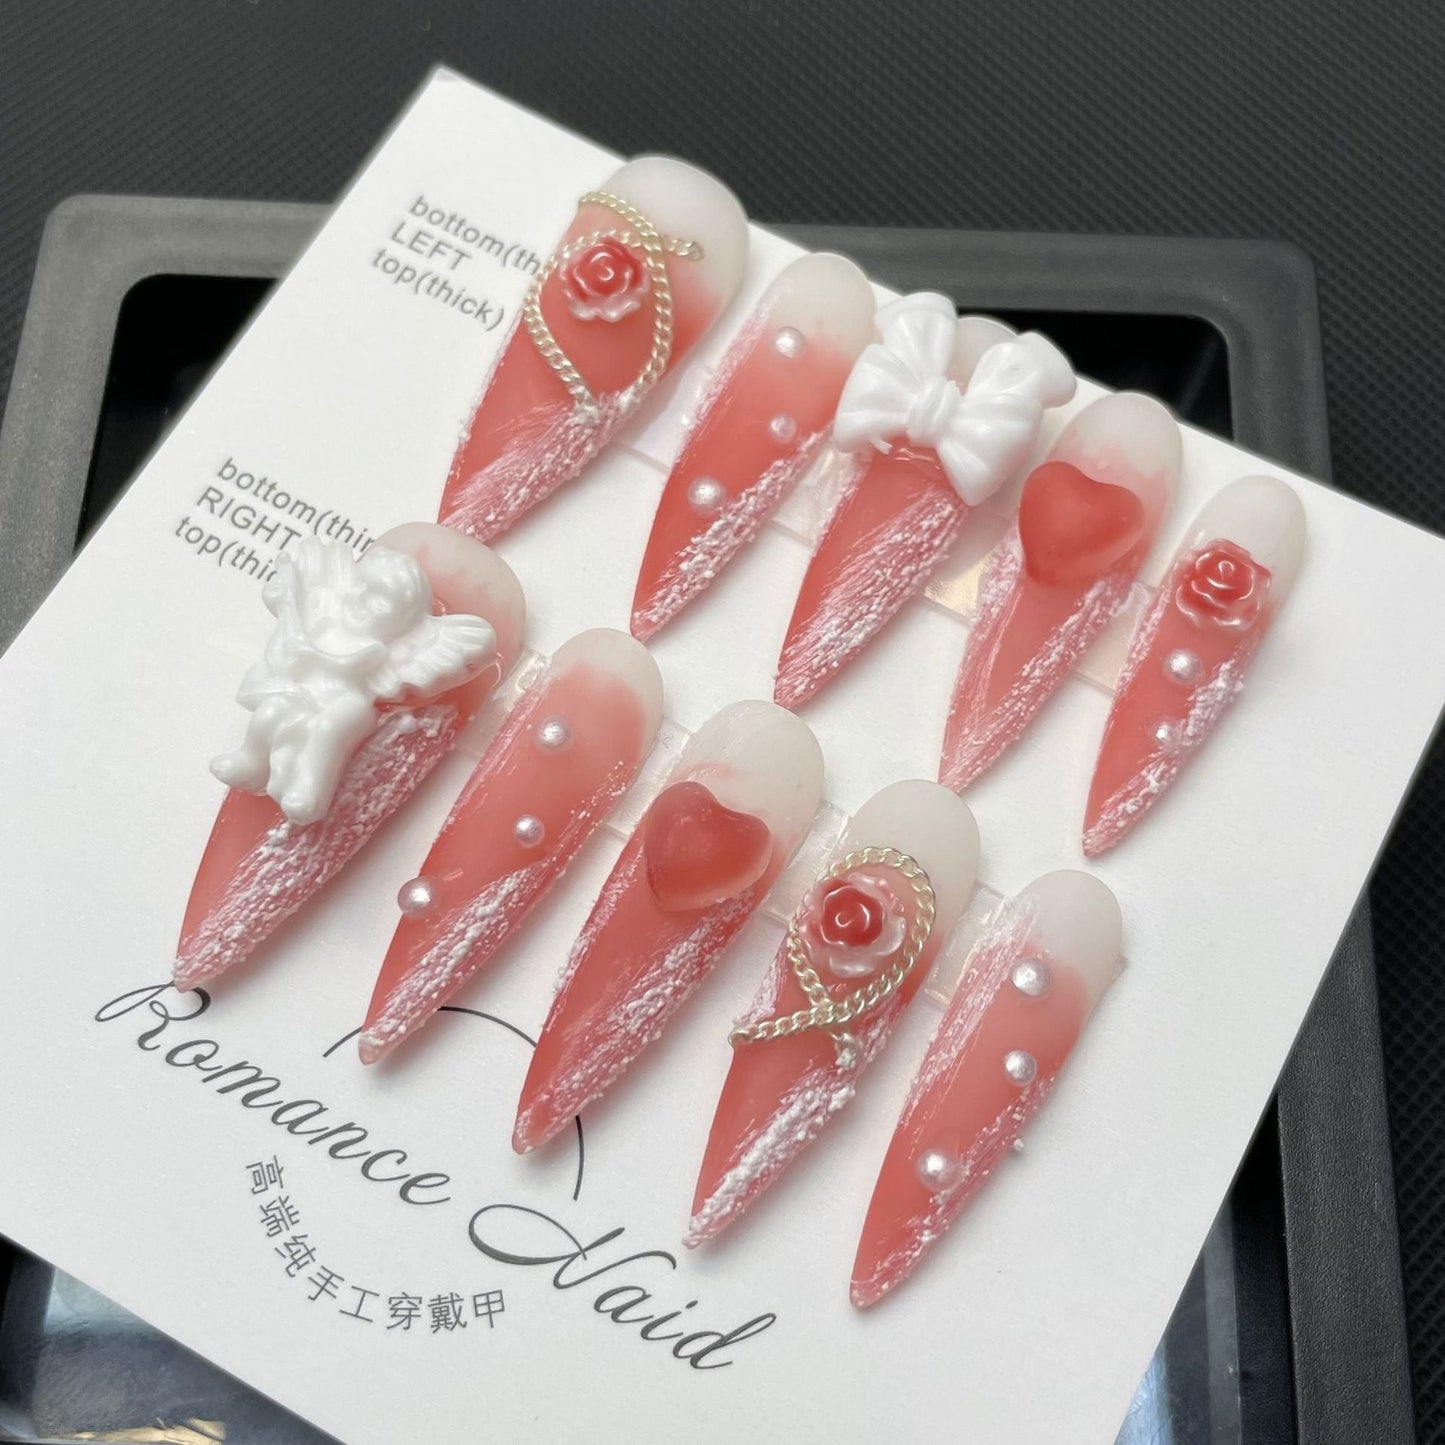 634 Rose Angel presse sur ongles 100% faux ongles faits main rose